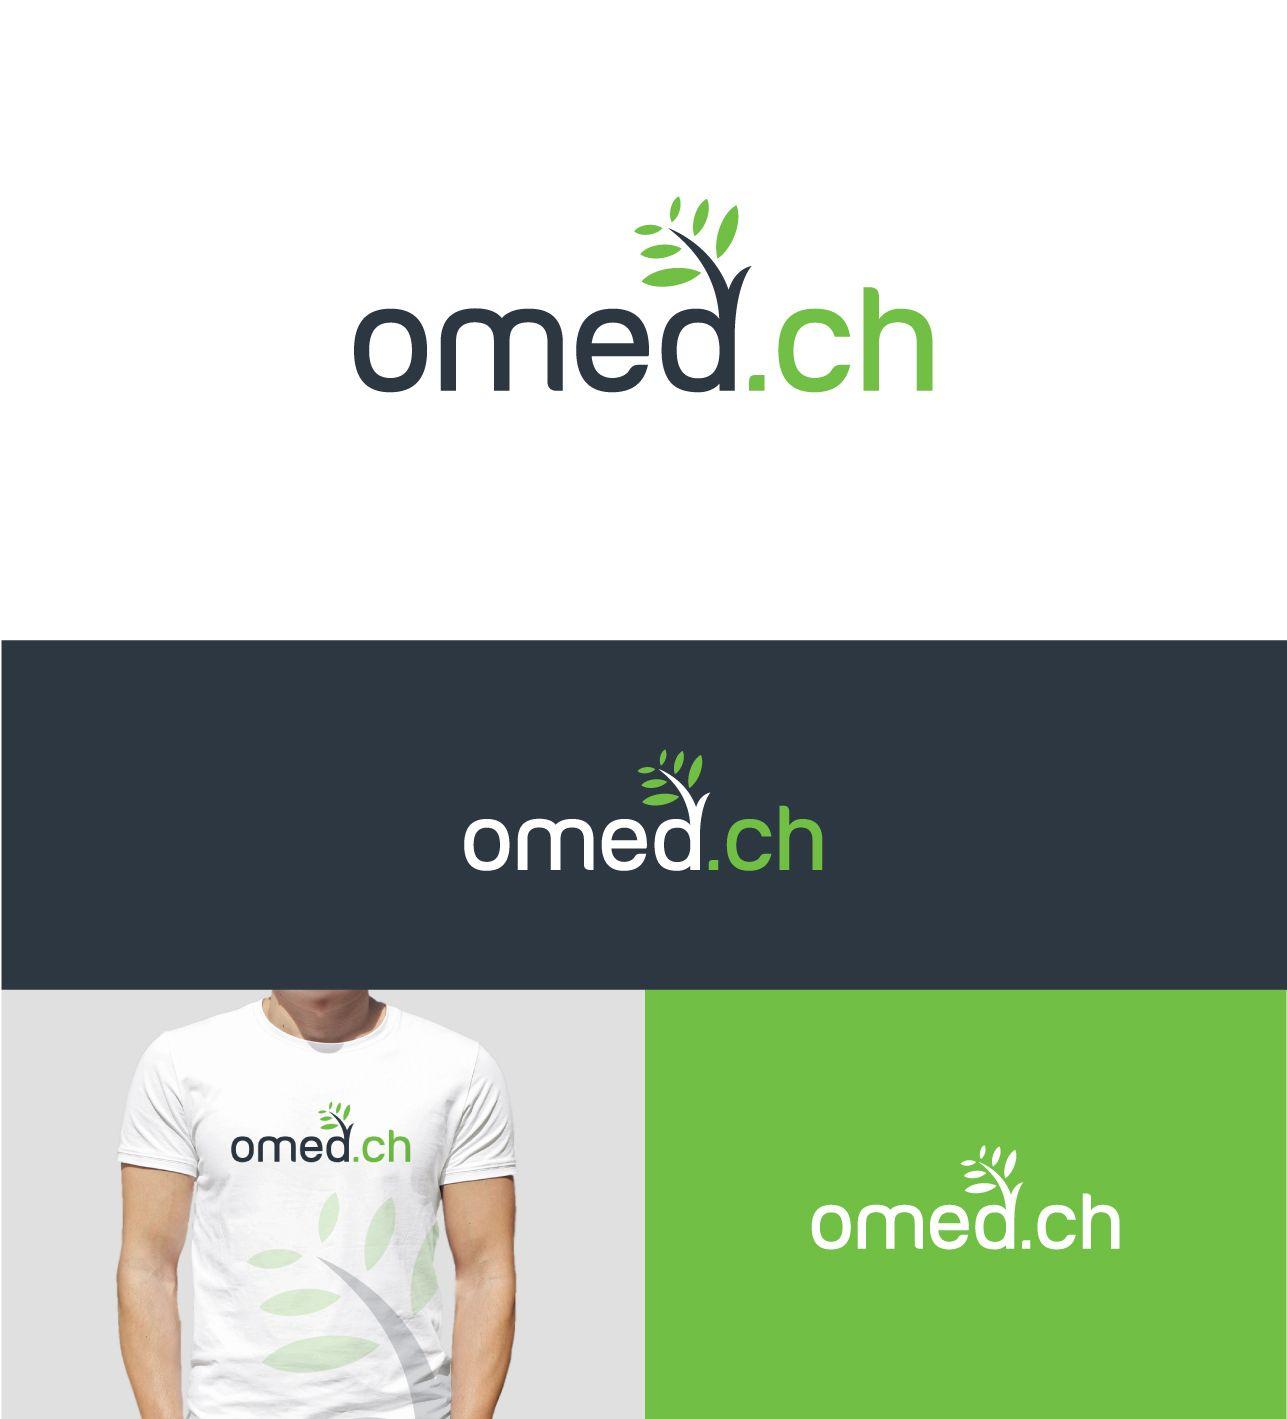 Health Product Logo - Modern, Bold, Health Product Logo Design for omed.ch